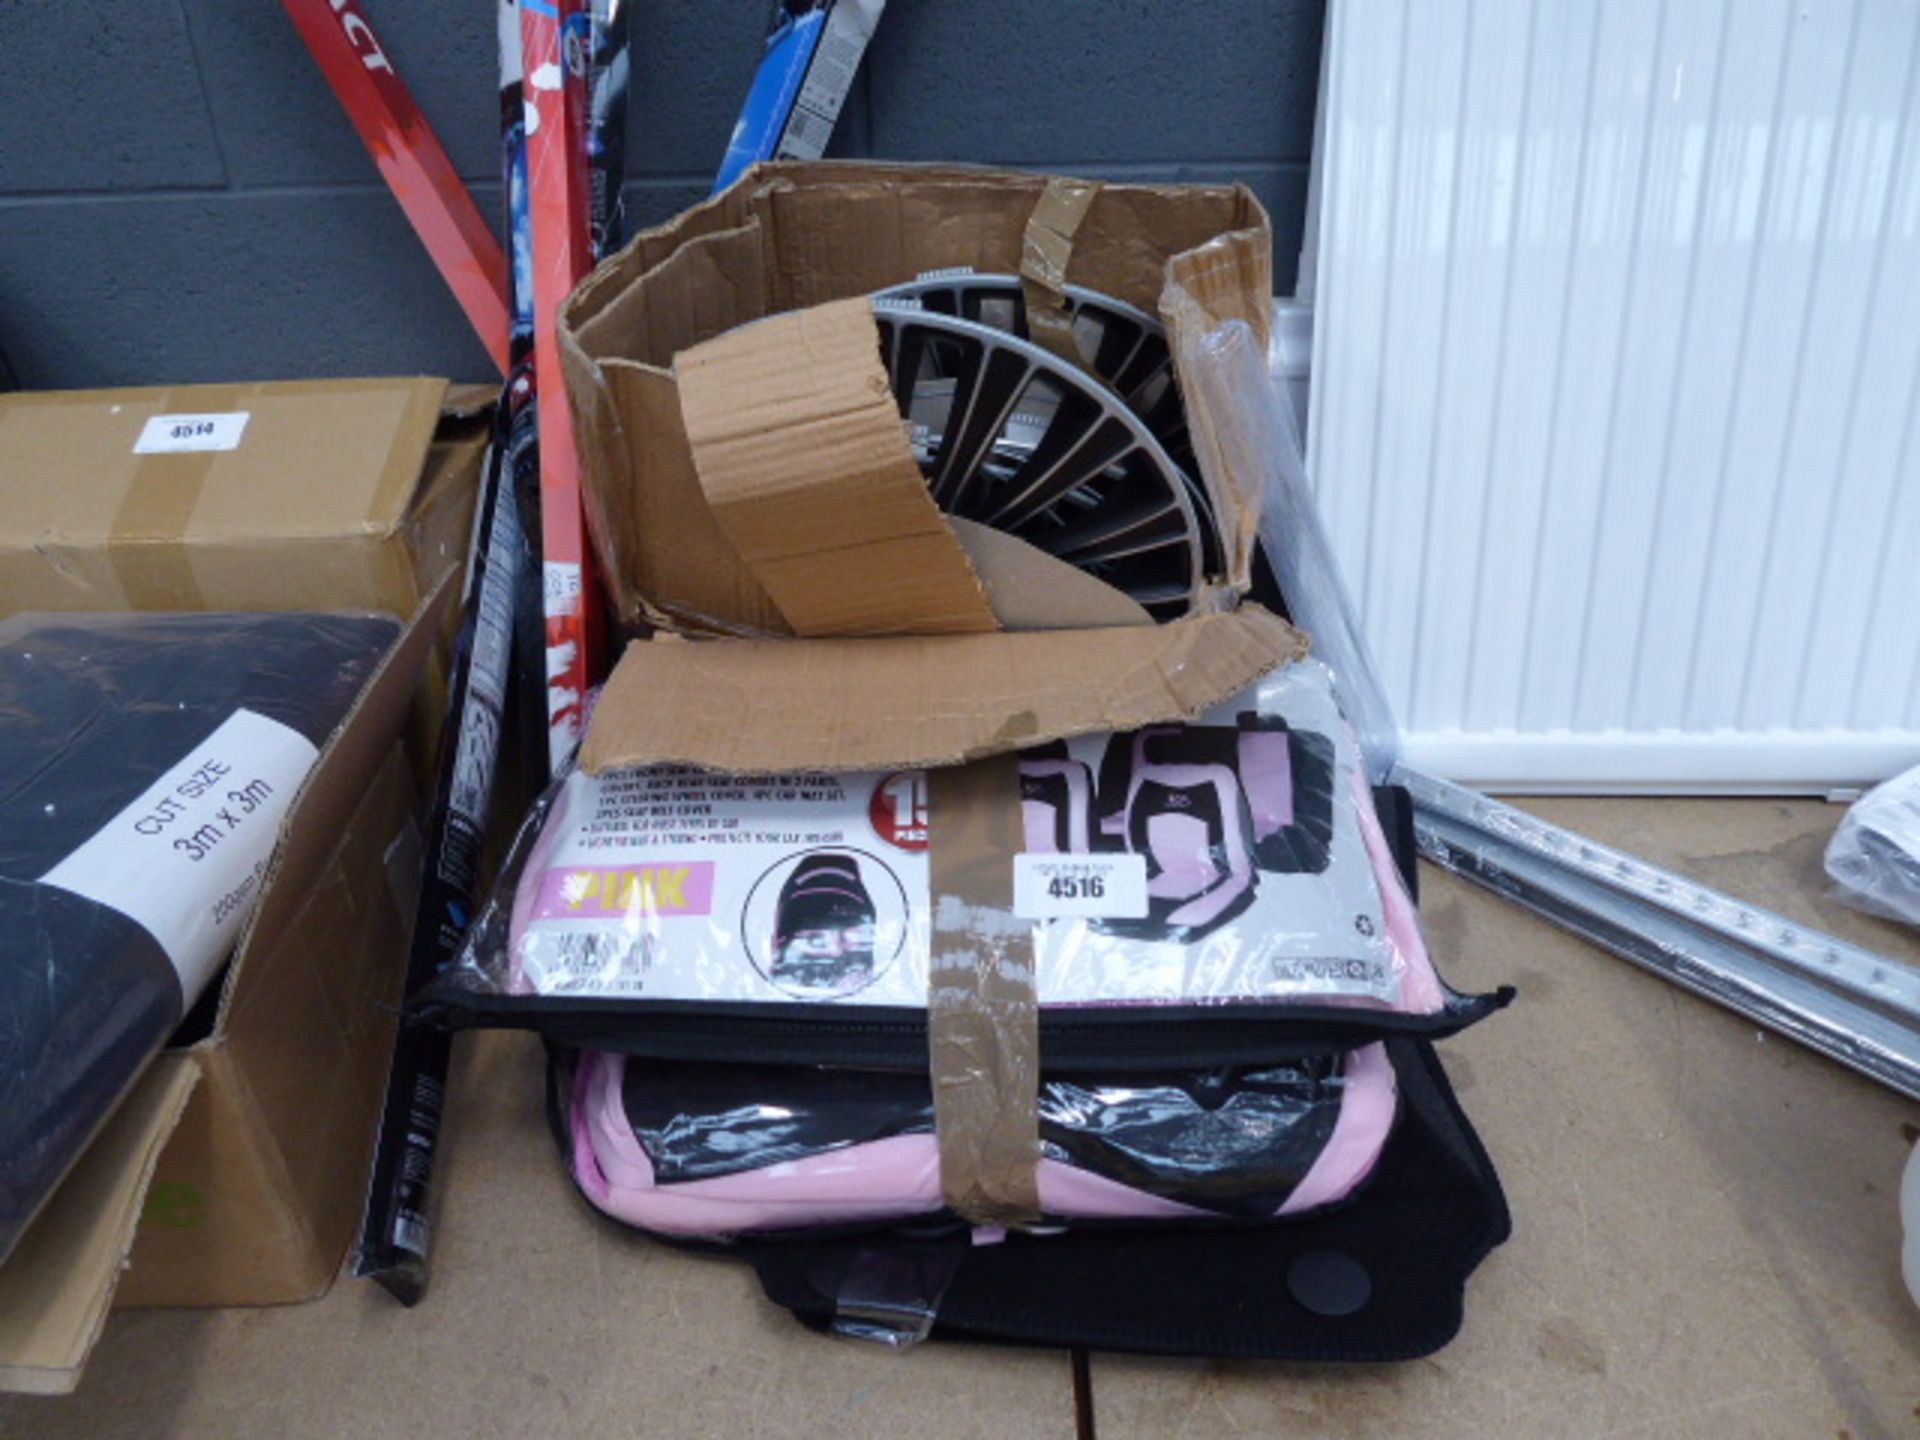 Pink car seats, car mats, set of wheel trims and some wiper blades